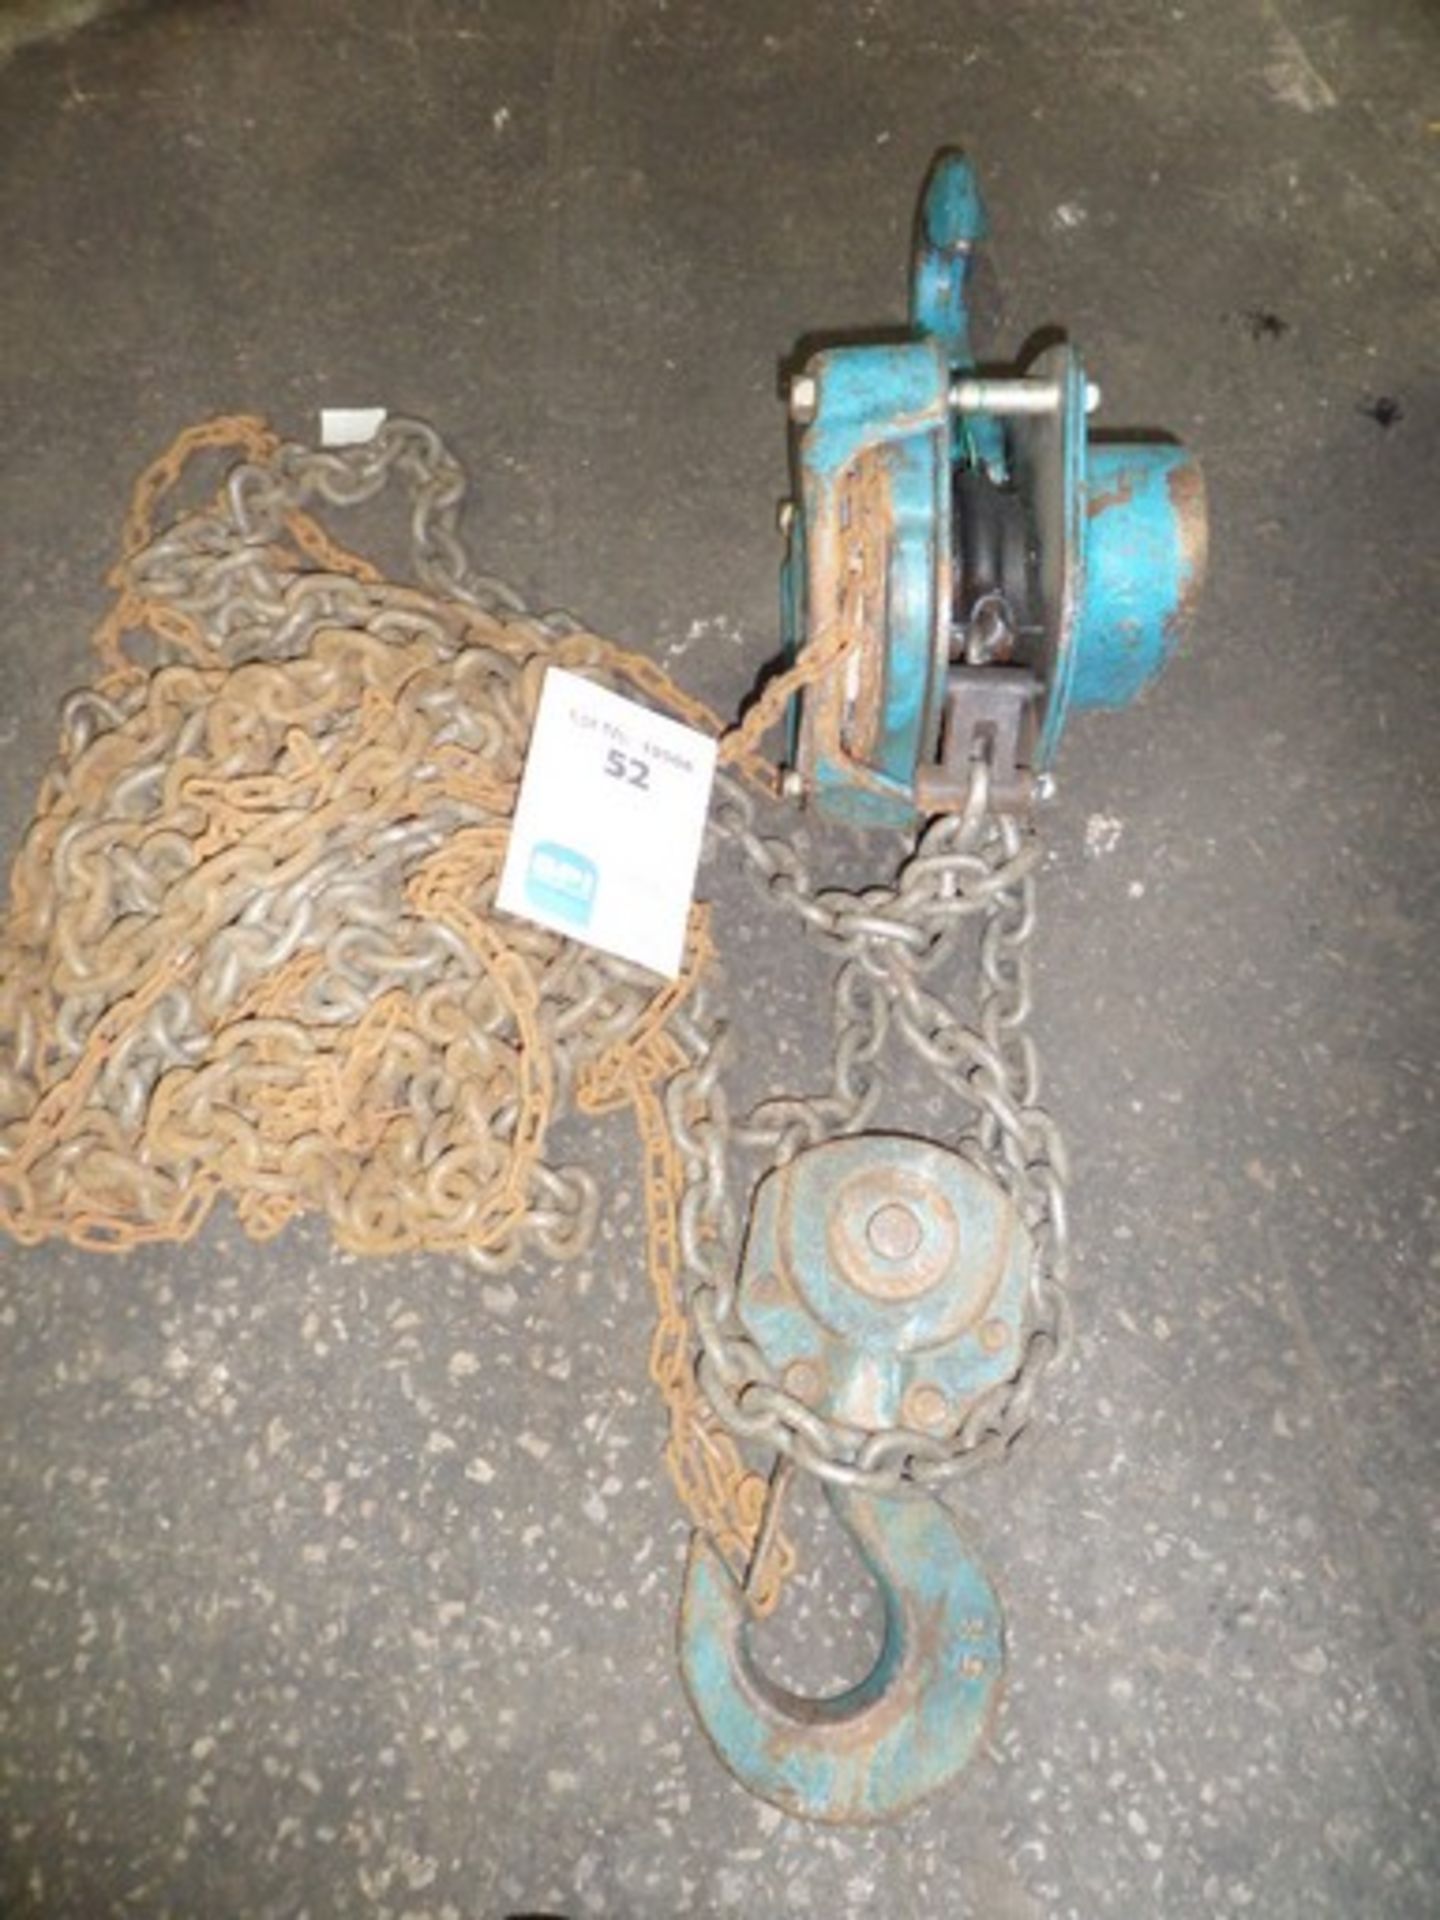 PFAFF Hublast 5000kg {015277} 5000KG CHAIN HOIST-6M LIFT Tested and is in good working order.